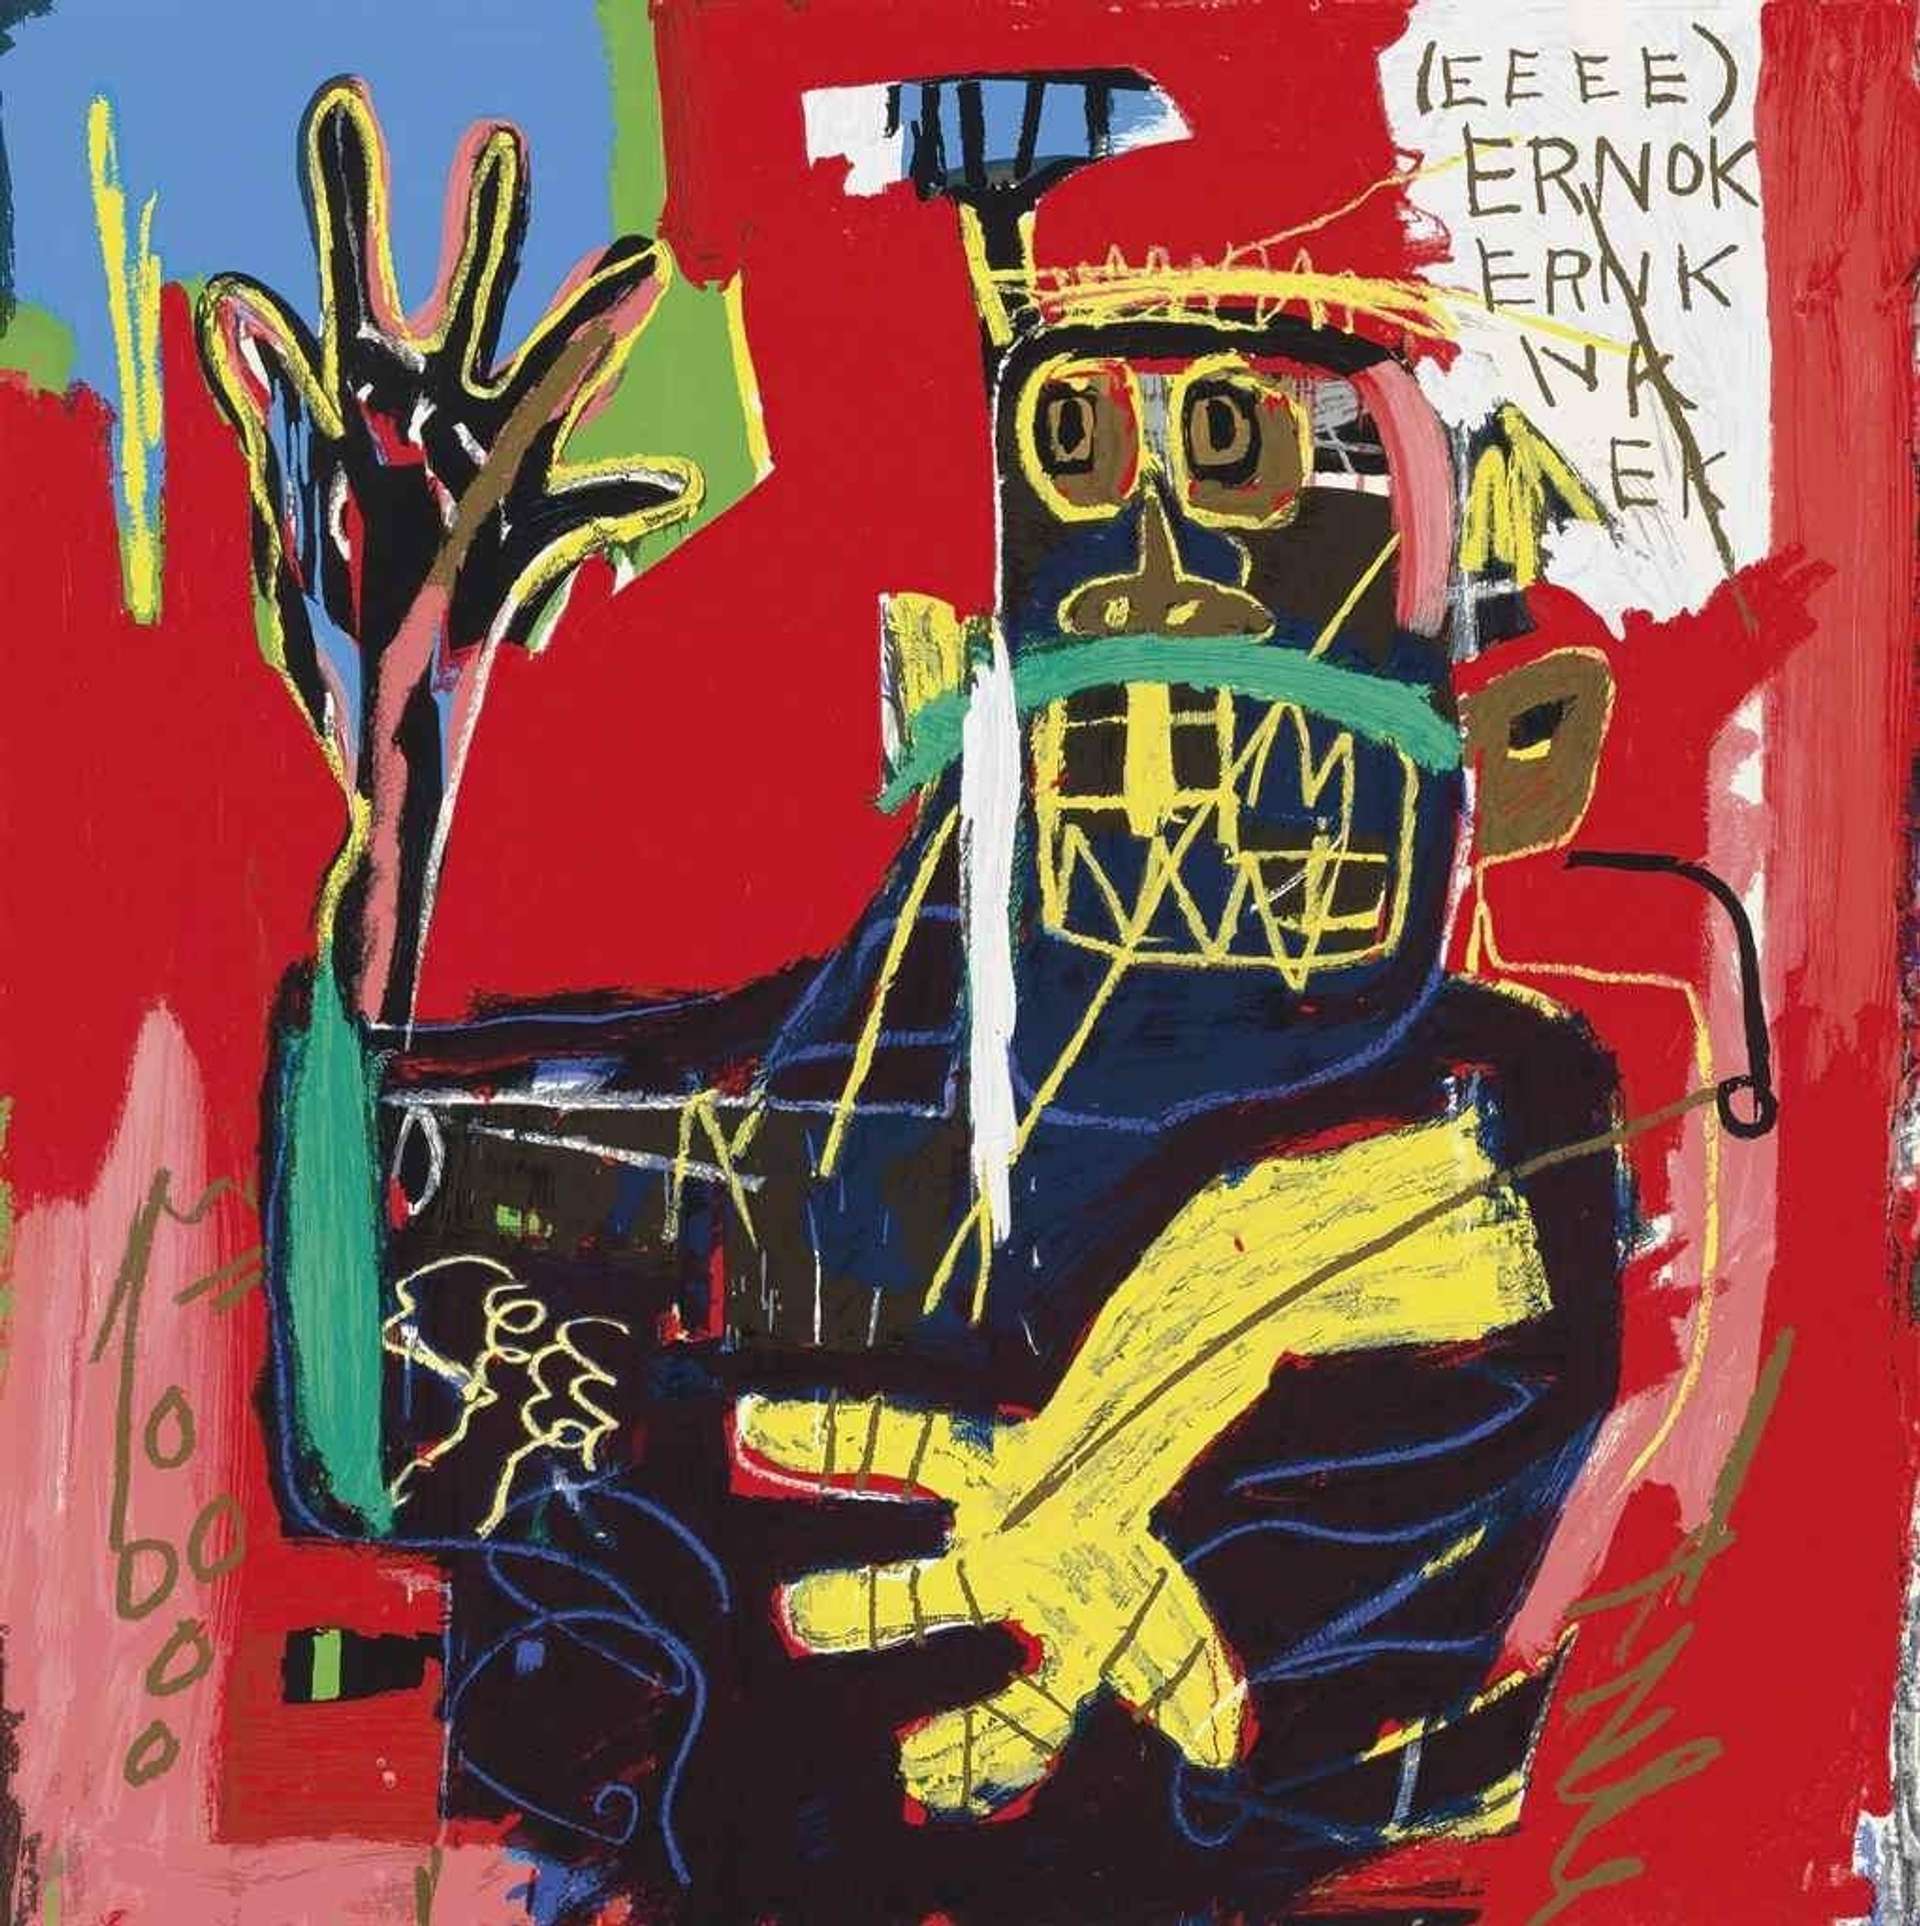 A screenprint of a cartoonish, scribbled black figure against an abstracted background of red, blue, and green. The figure's features are outlined with scribbled lines in yellow, pink, blue, and green. In the top right-hand corner, "ERNOK", the works title, is written in various ways.